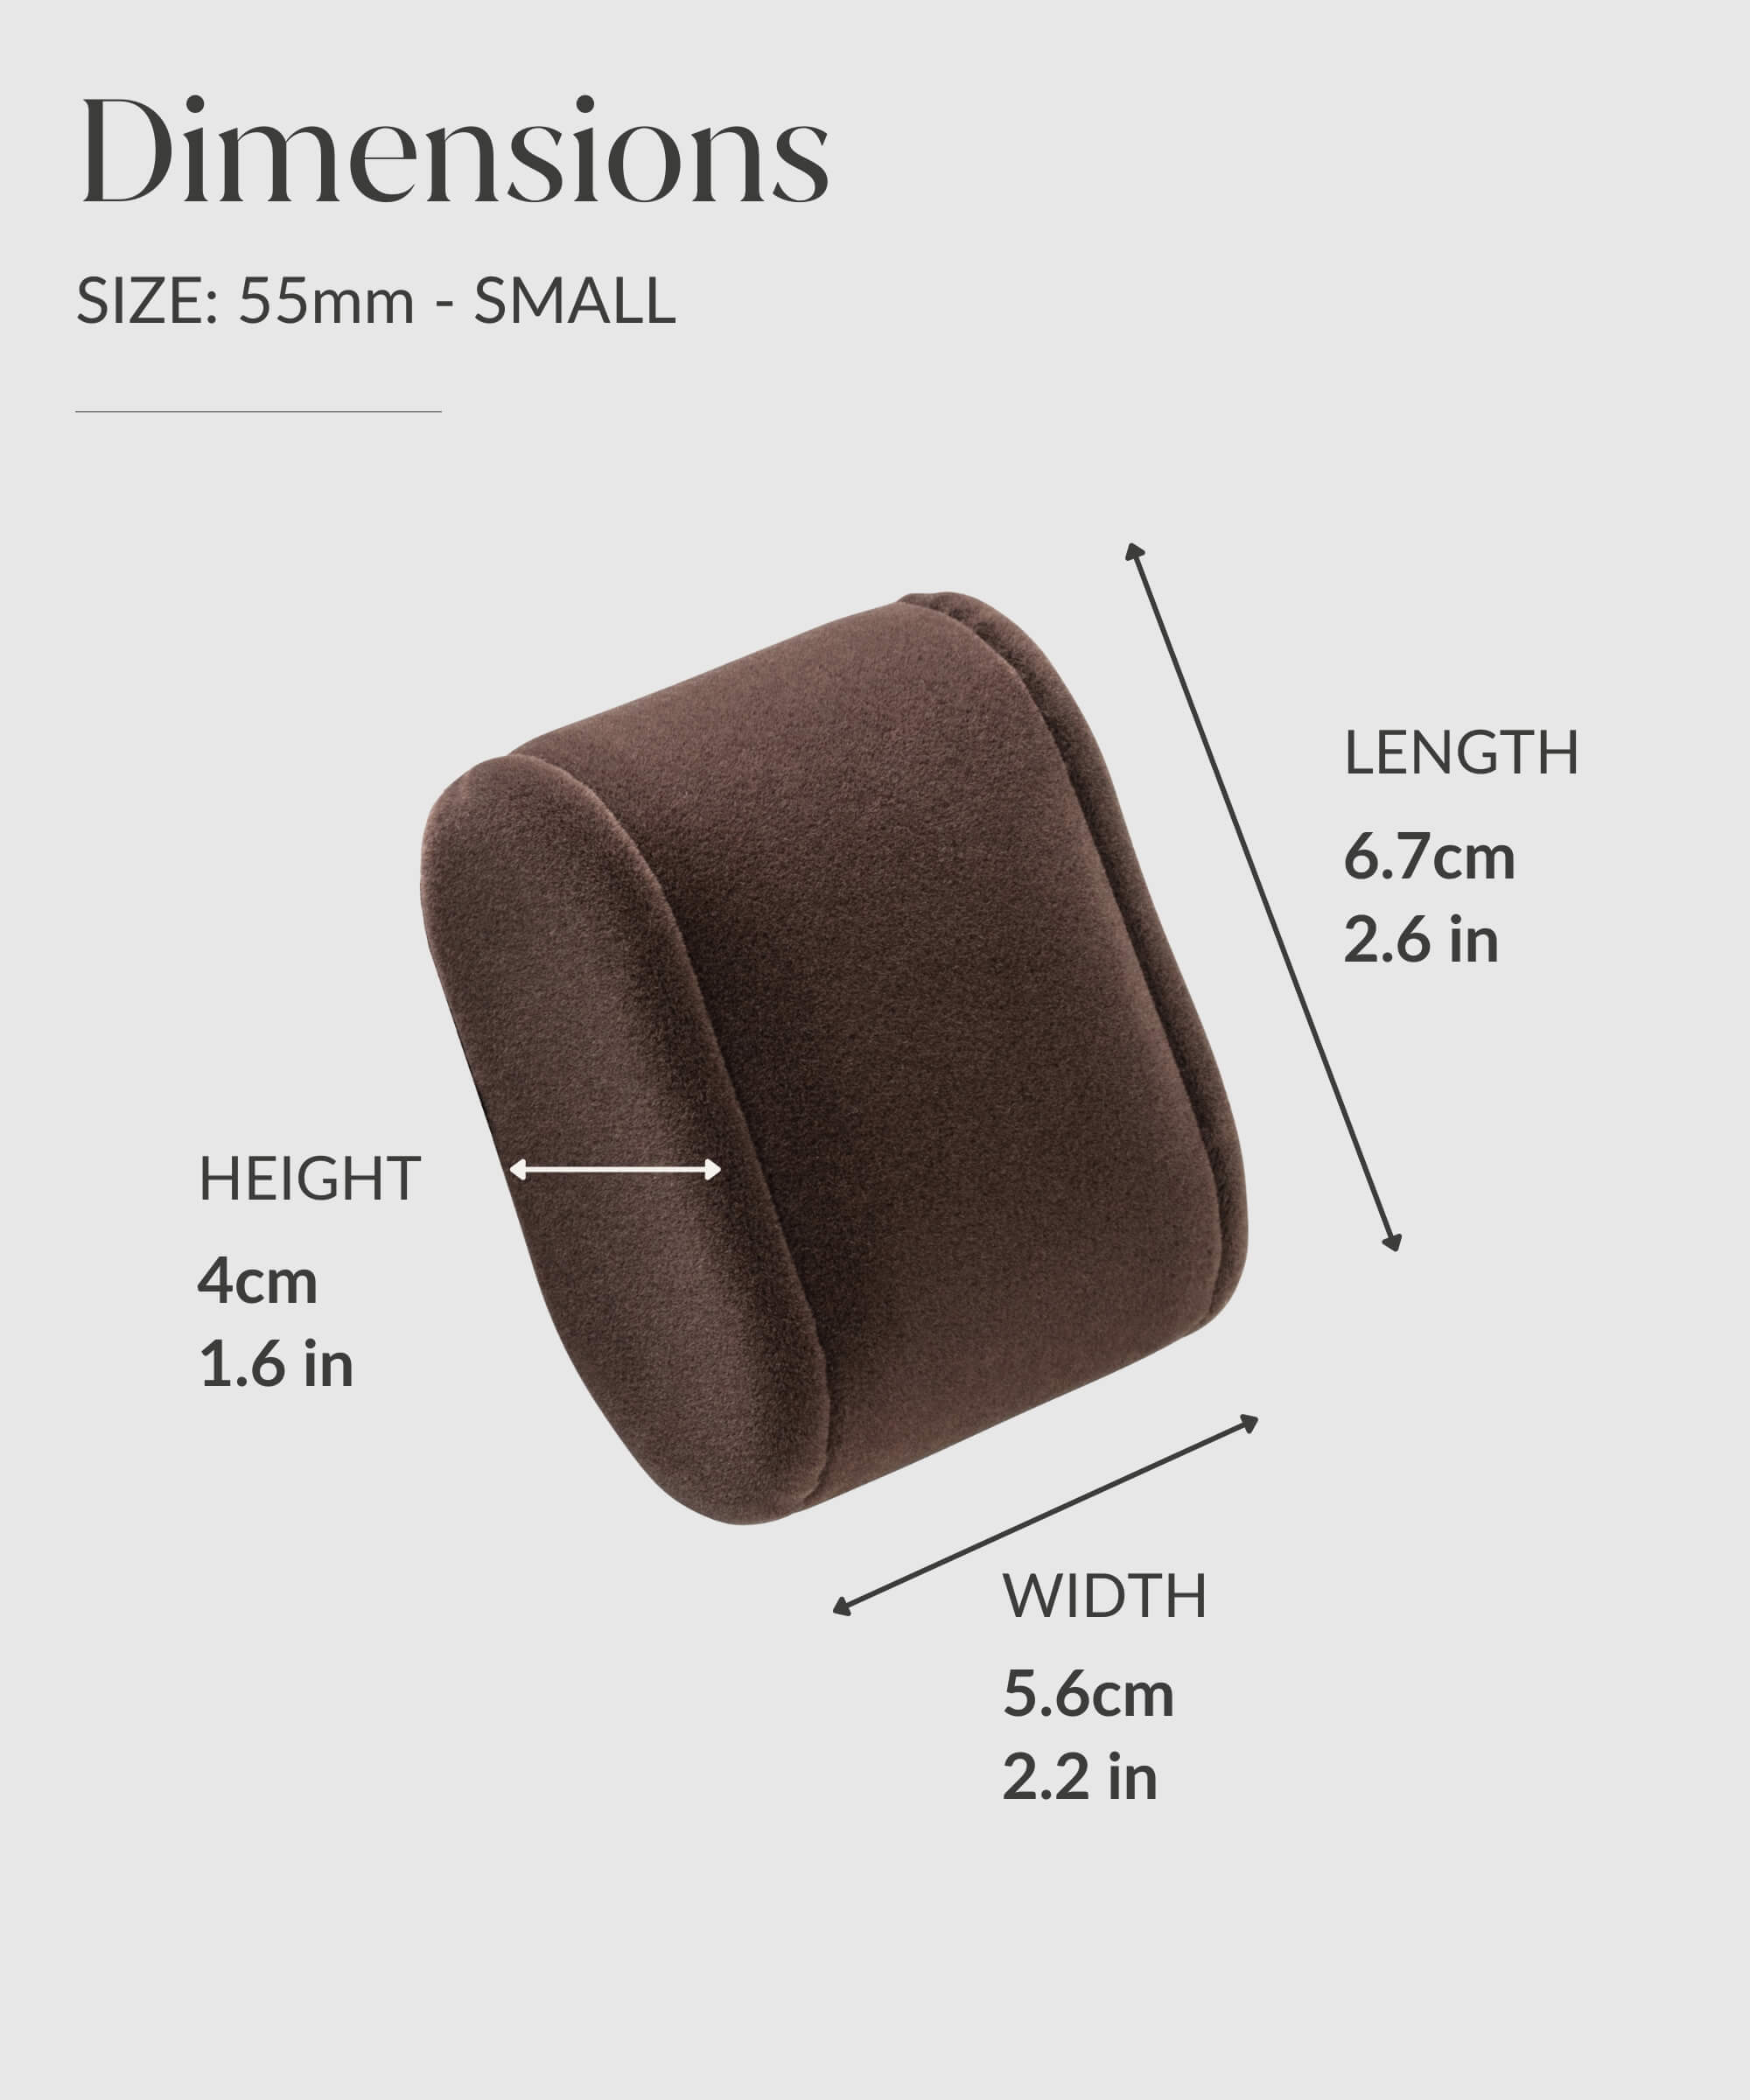 The dimensions of a brown TAWBURY Bayswater Replacement Watch Box Pillows - 55mm - Small.